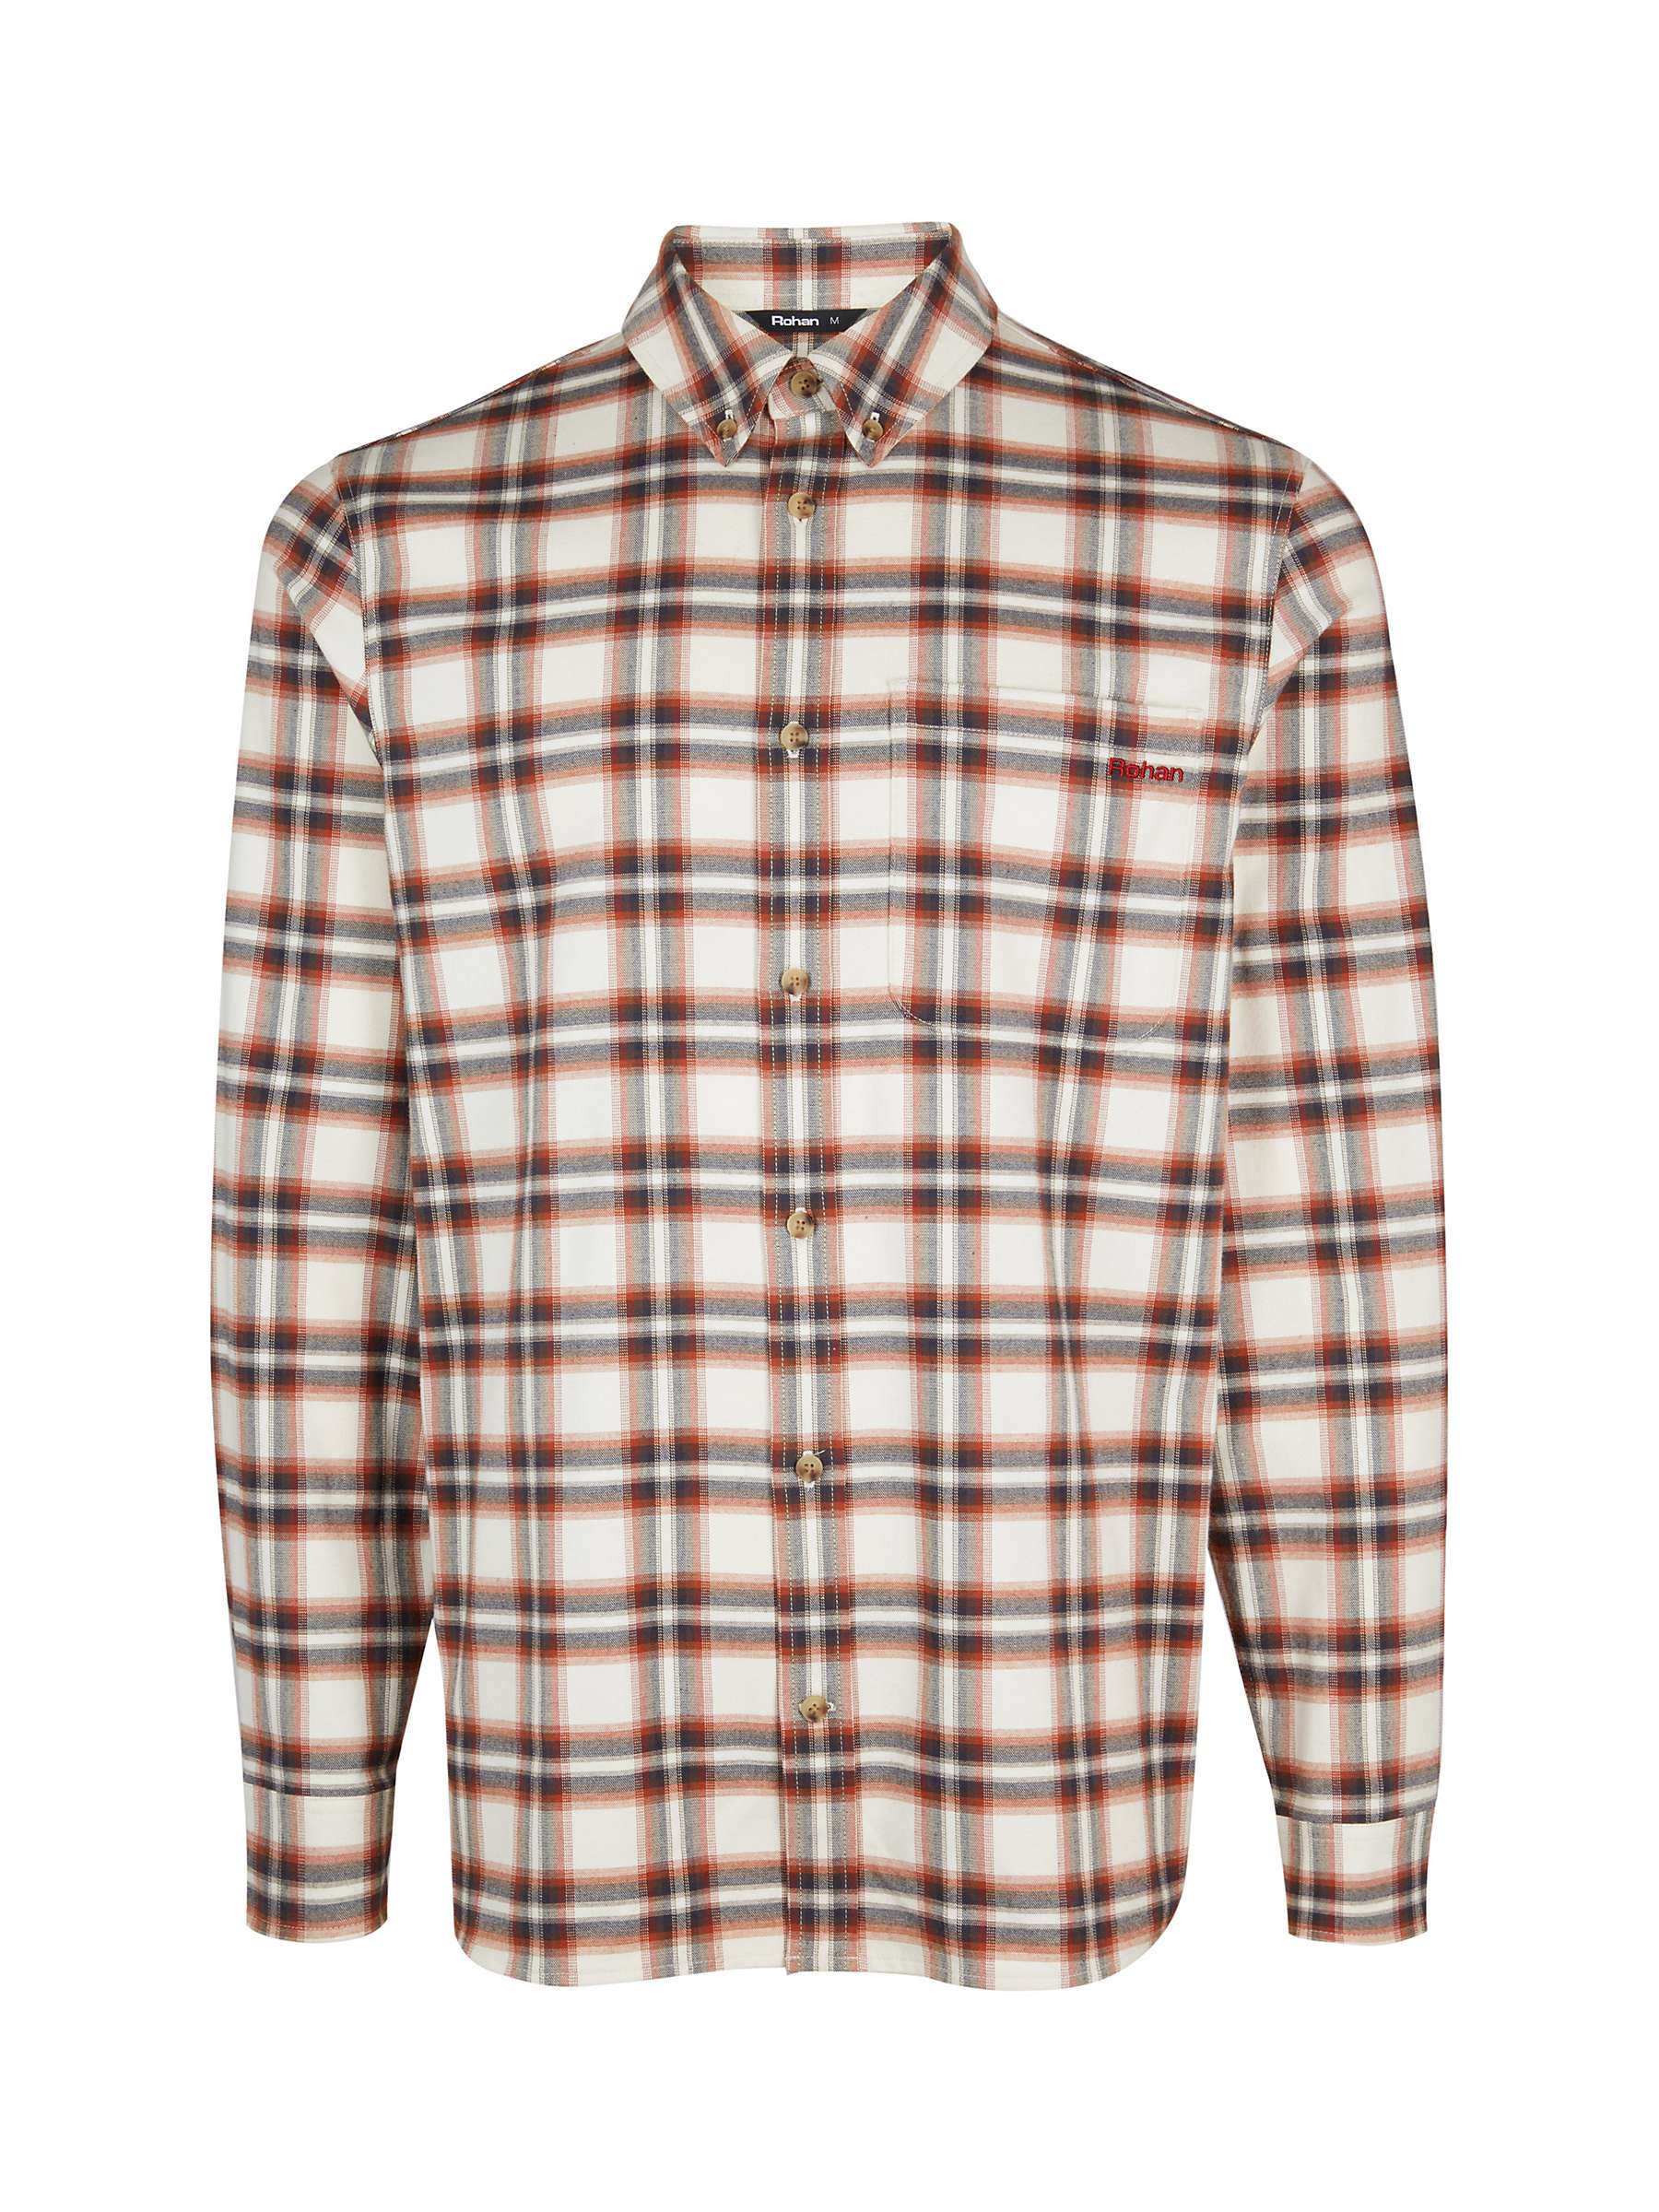 Buy Rohan Dover Long Sleeve Check Shirt Online at johnlewis.com